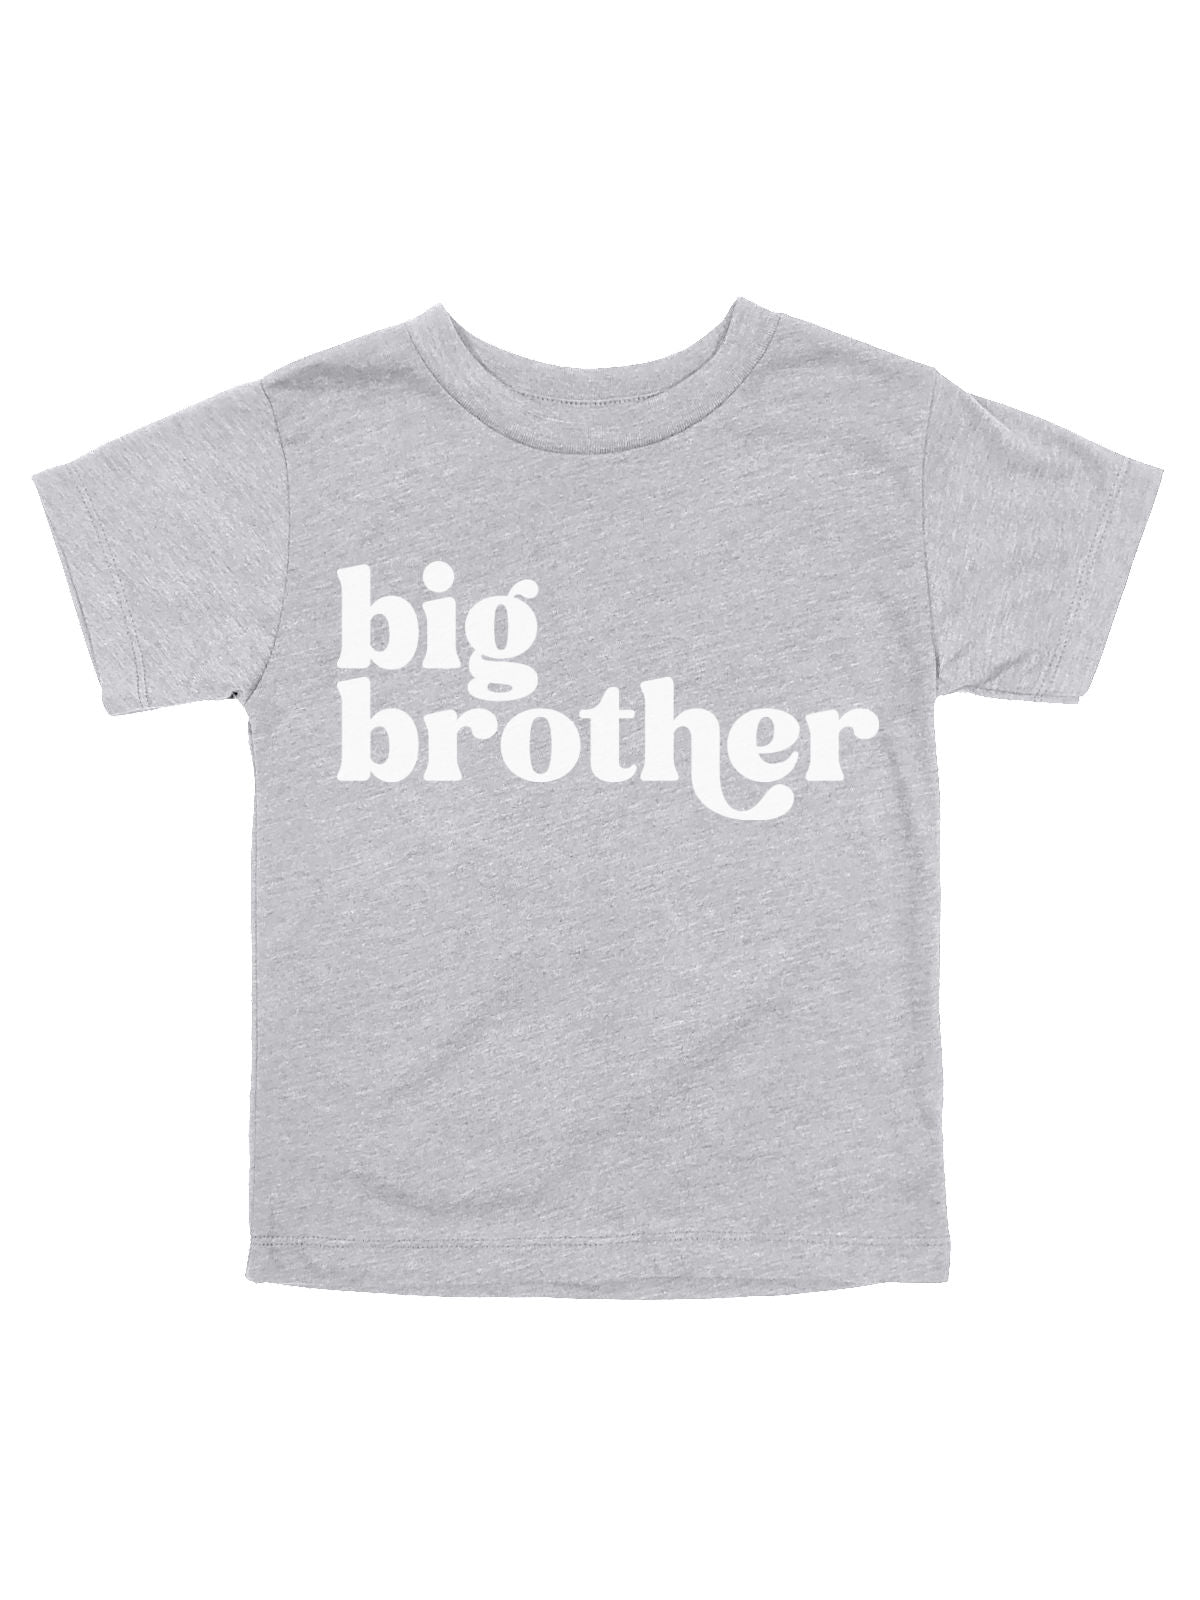 Big Brother Shirt for Boys in Heather Gray